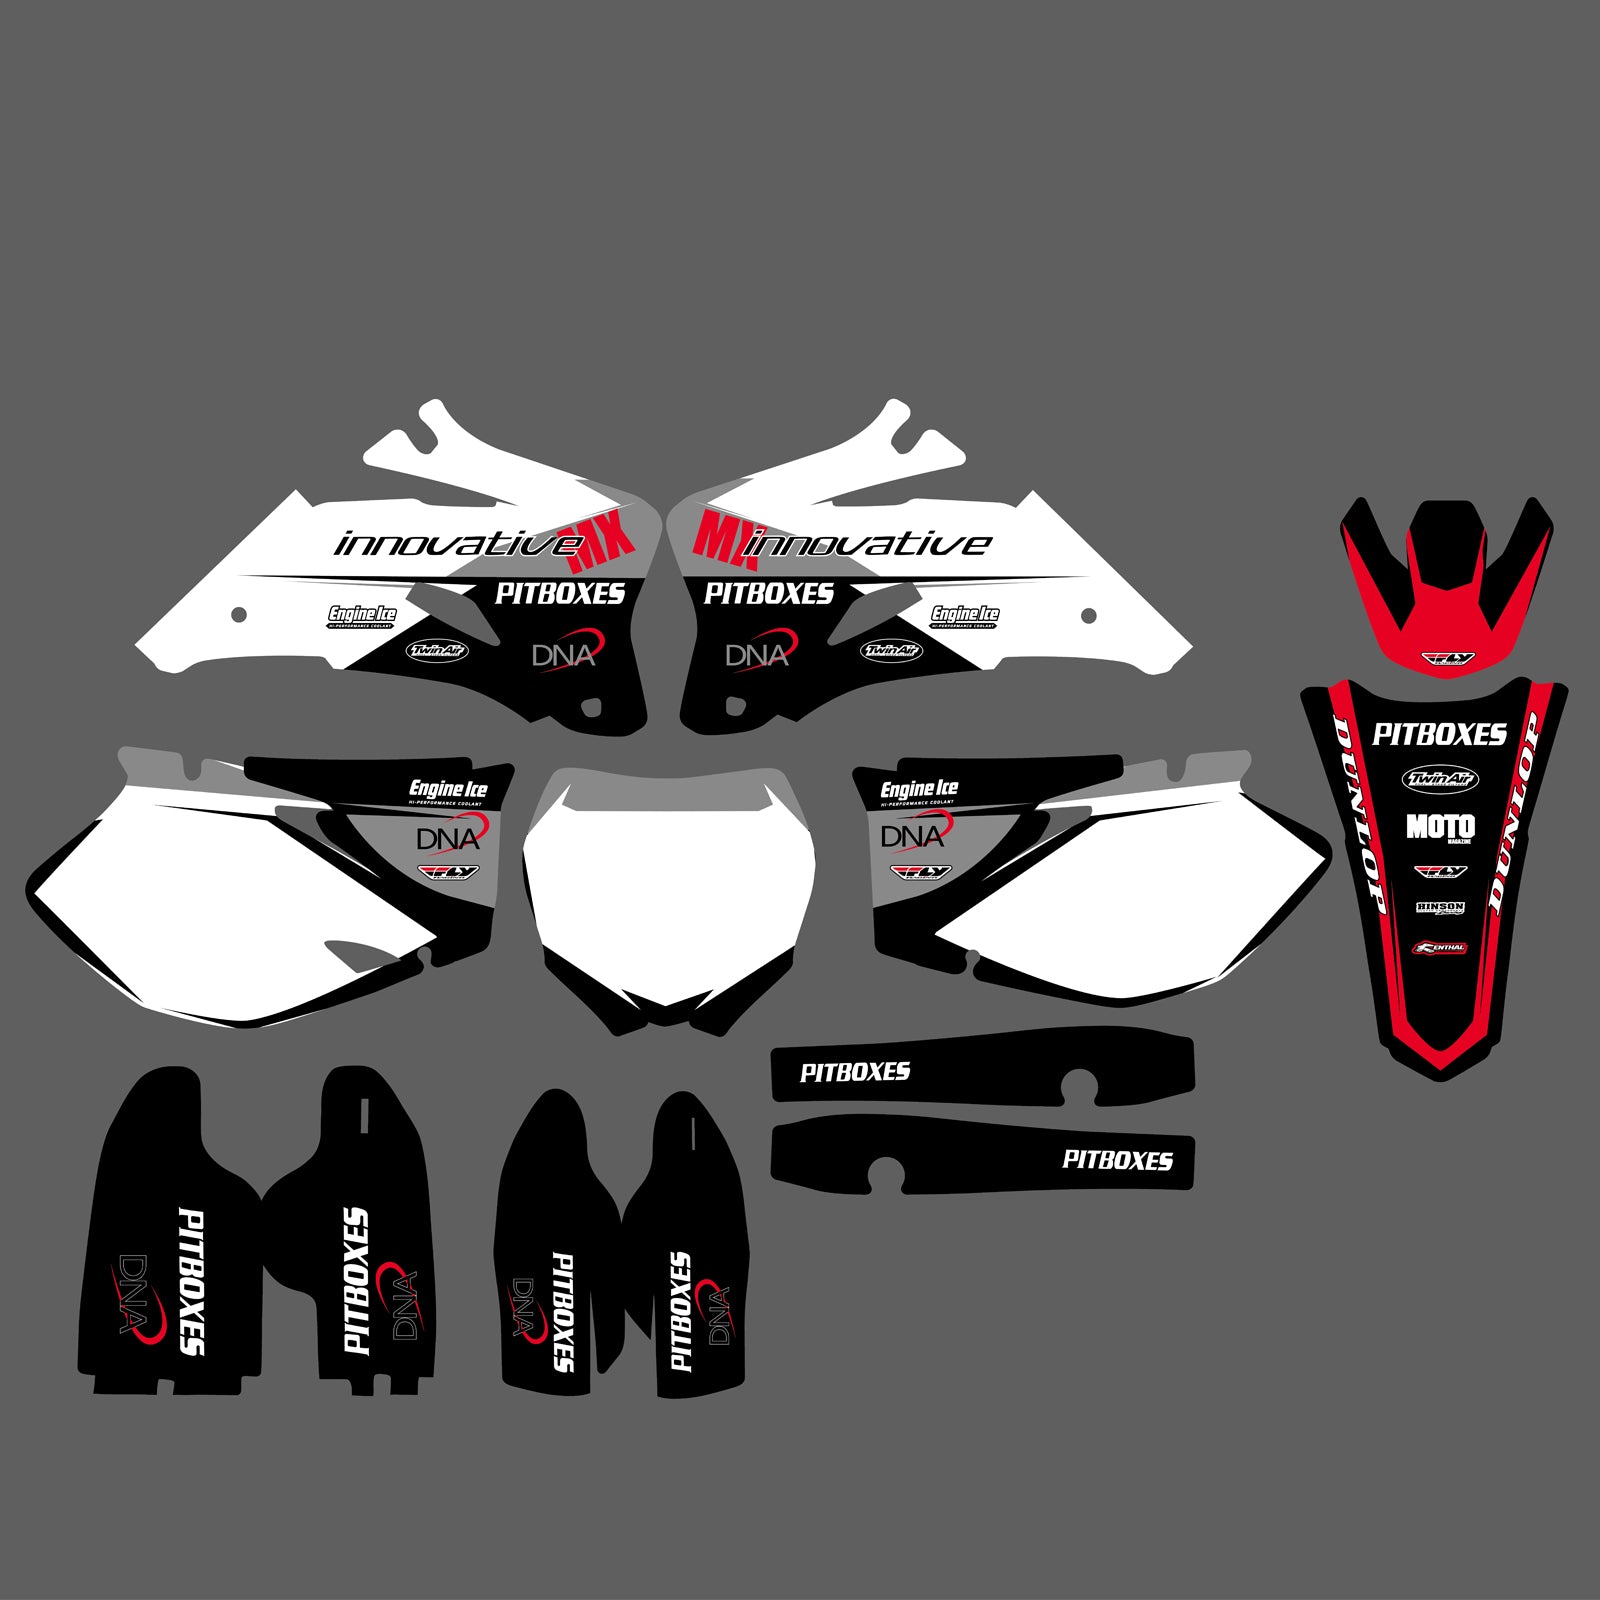 Motorcycle Team Full Decals Graphic Kit For Yamaha YZF250/YZF450 2006-2009